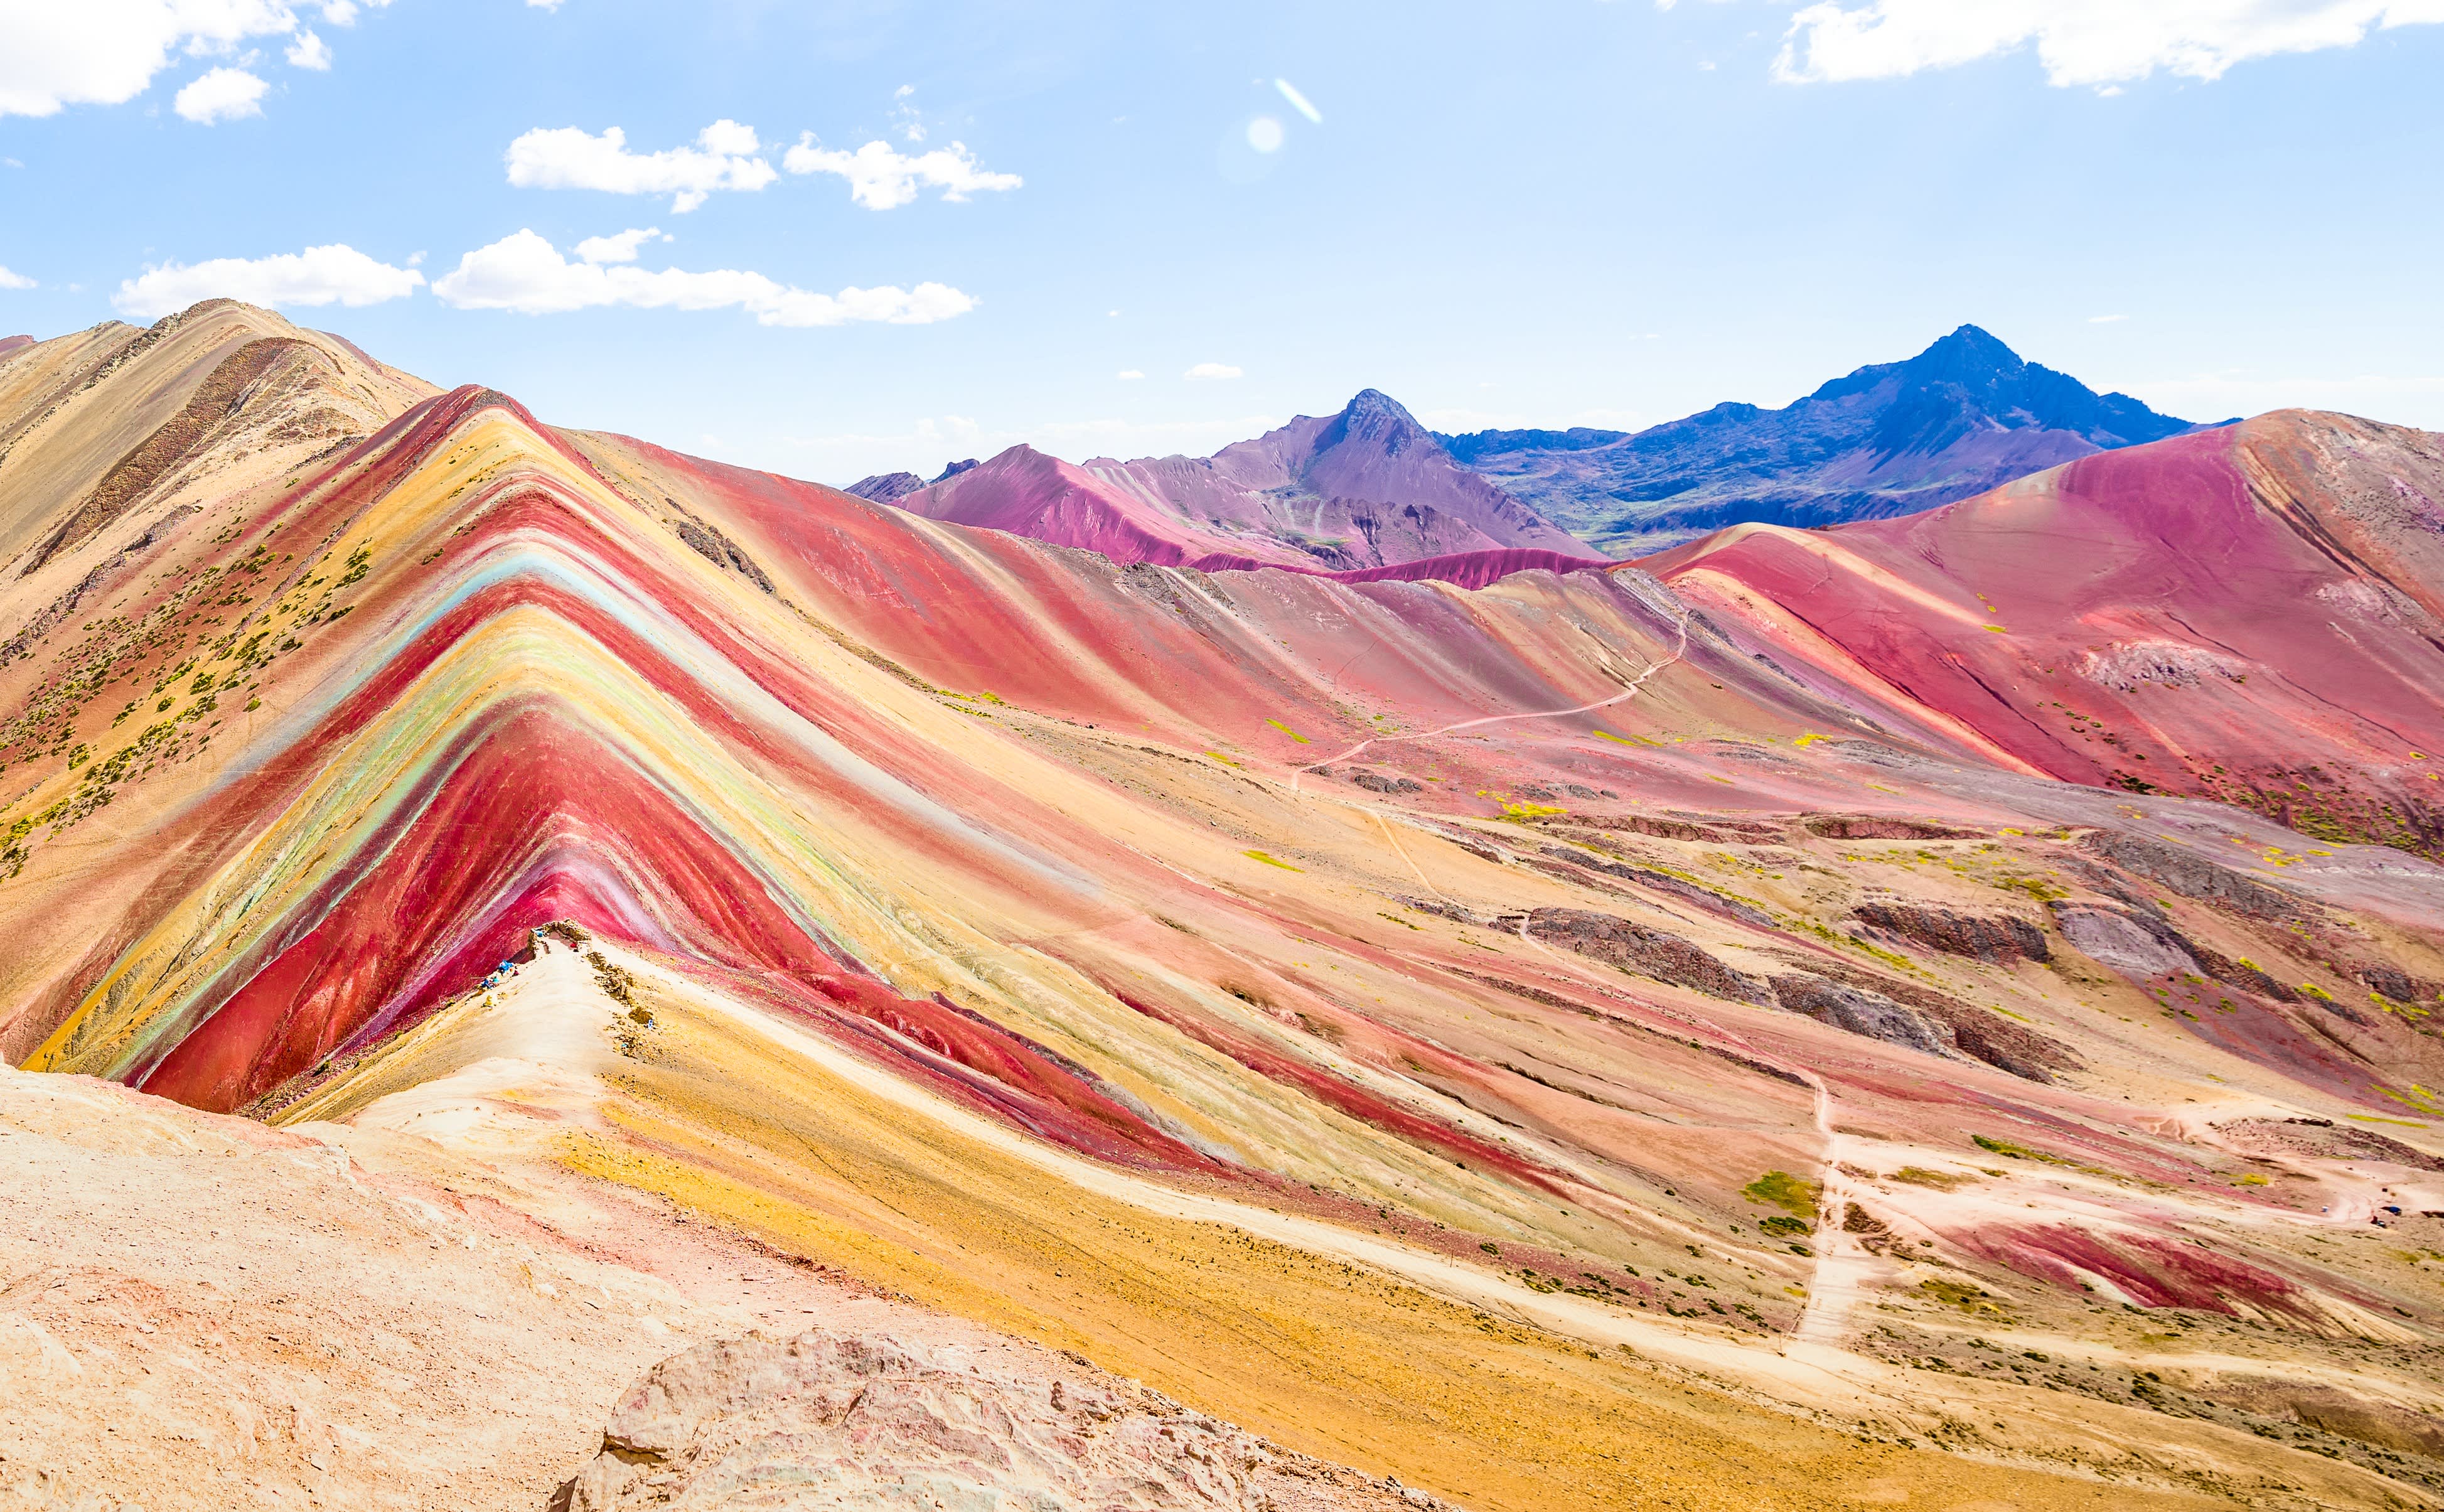 Instagrammers rave about Peru's 'Rainbow Mountain.' Here's what it